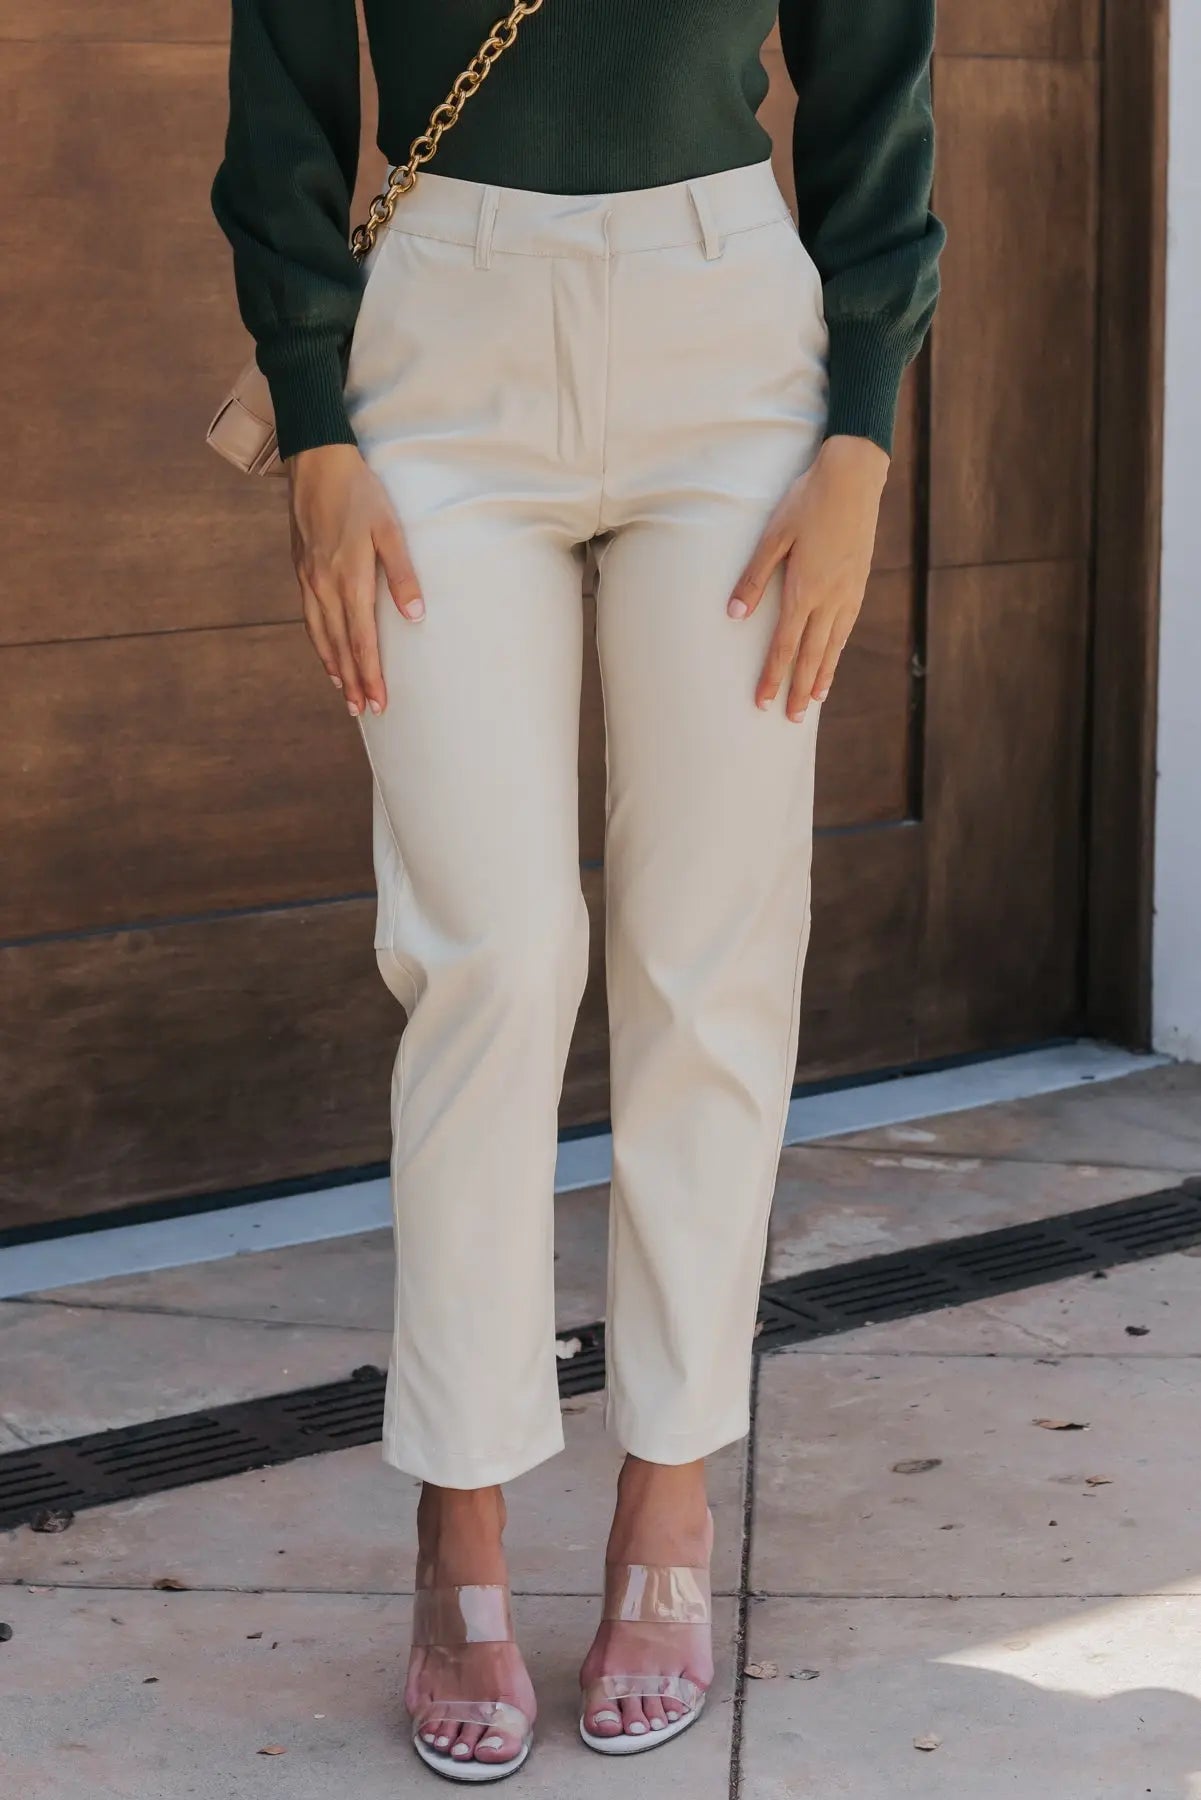 Seraphina Cream Faux Leather Pants - Final Sale